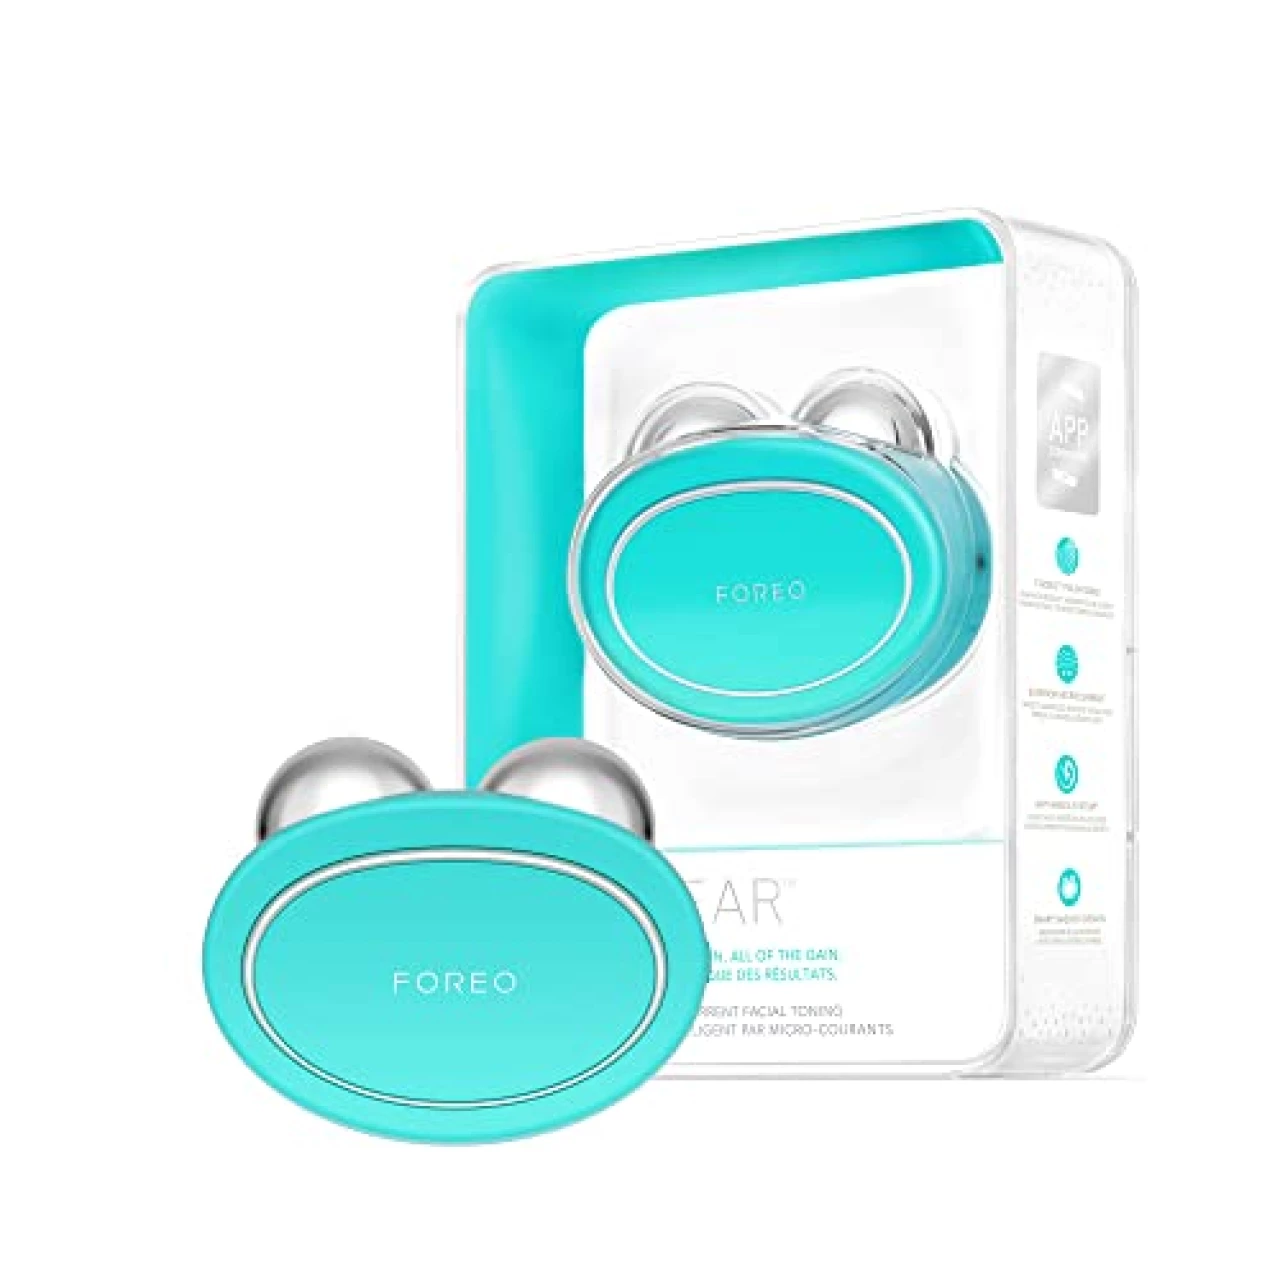 FOREO Bear Microcurrent Facial Device - Face Sculpting Tool - Instant Face Lift - Firm &amp; Contour - Non-Invasive - Increases Absorption of Facial Skin Care Products - Mint